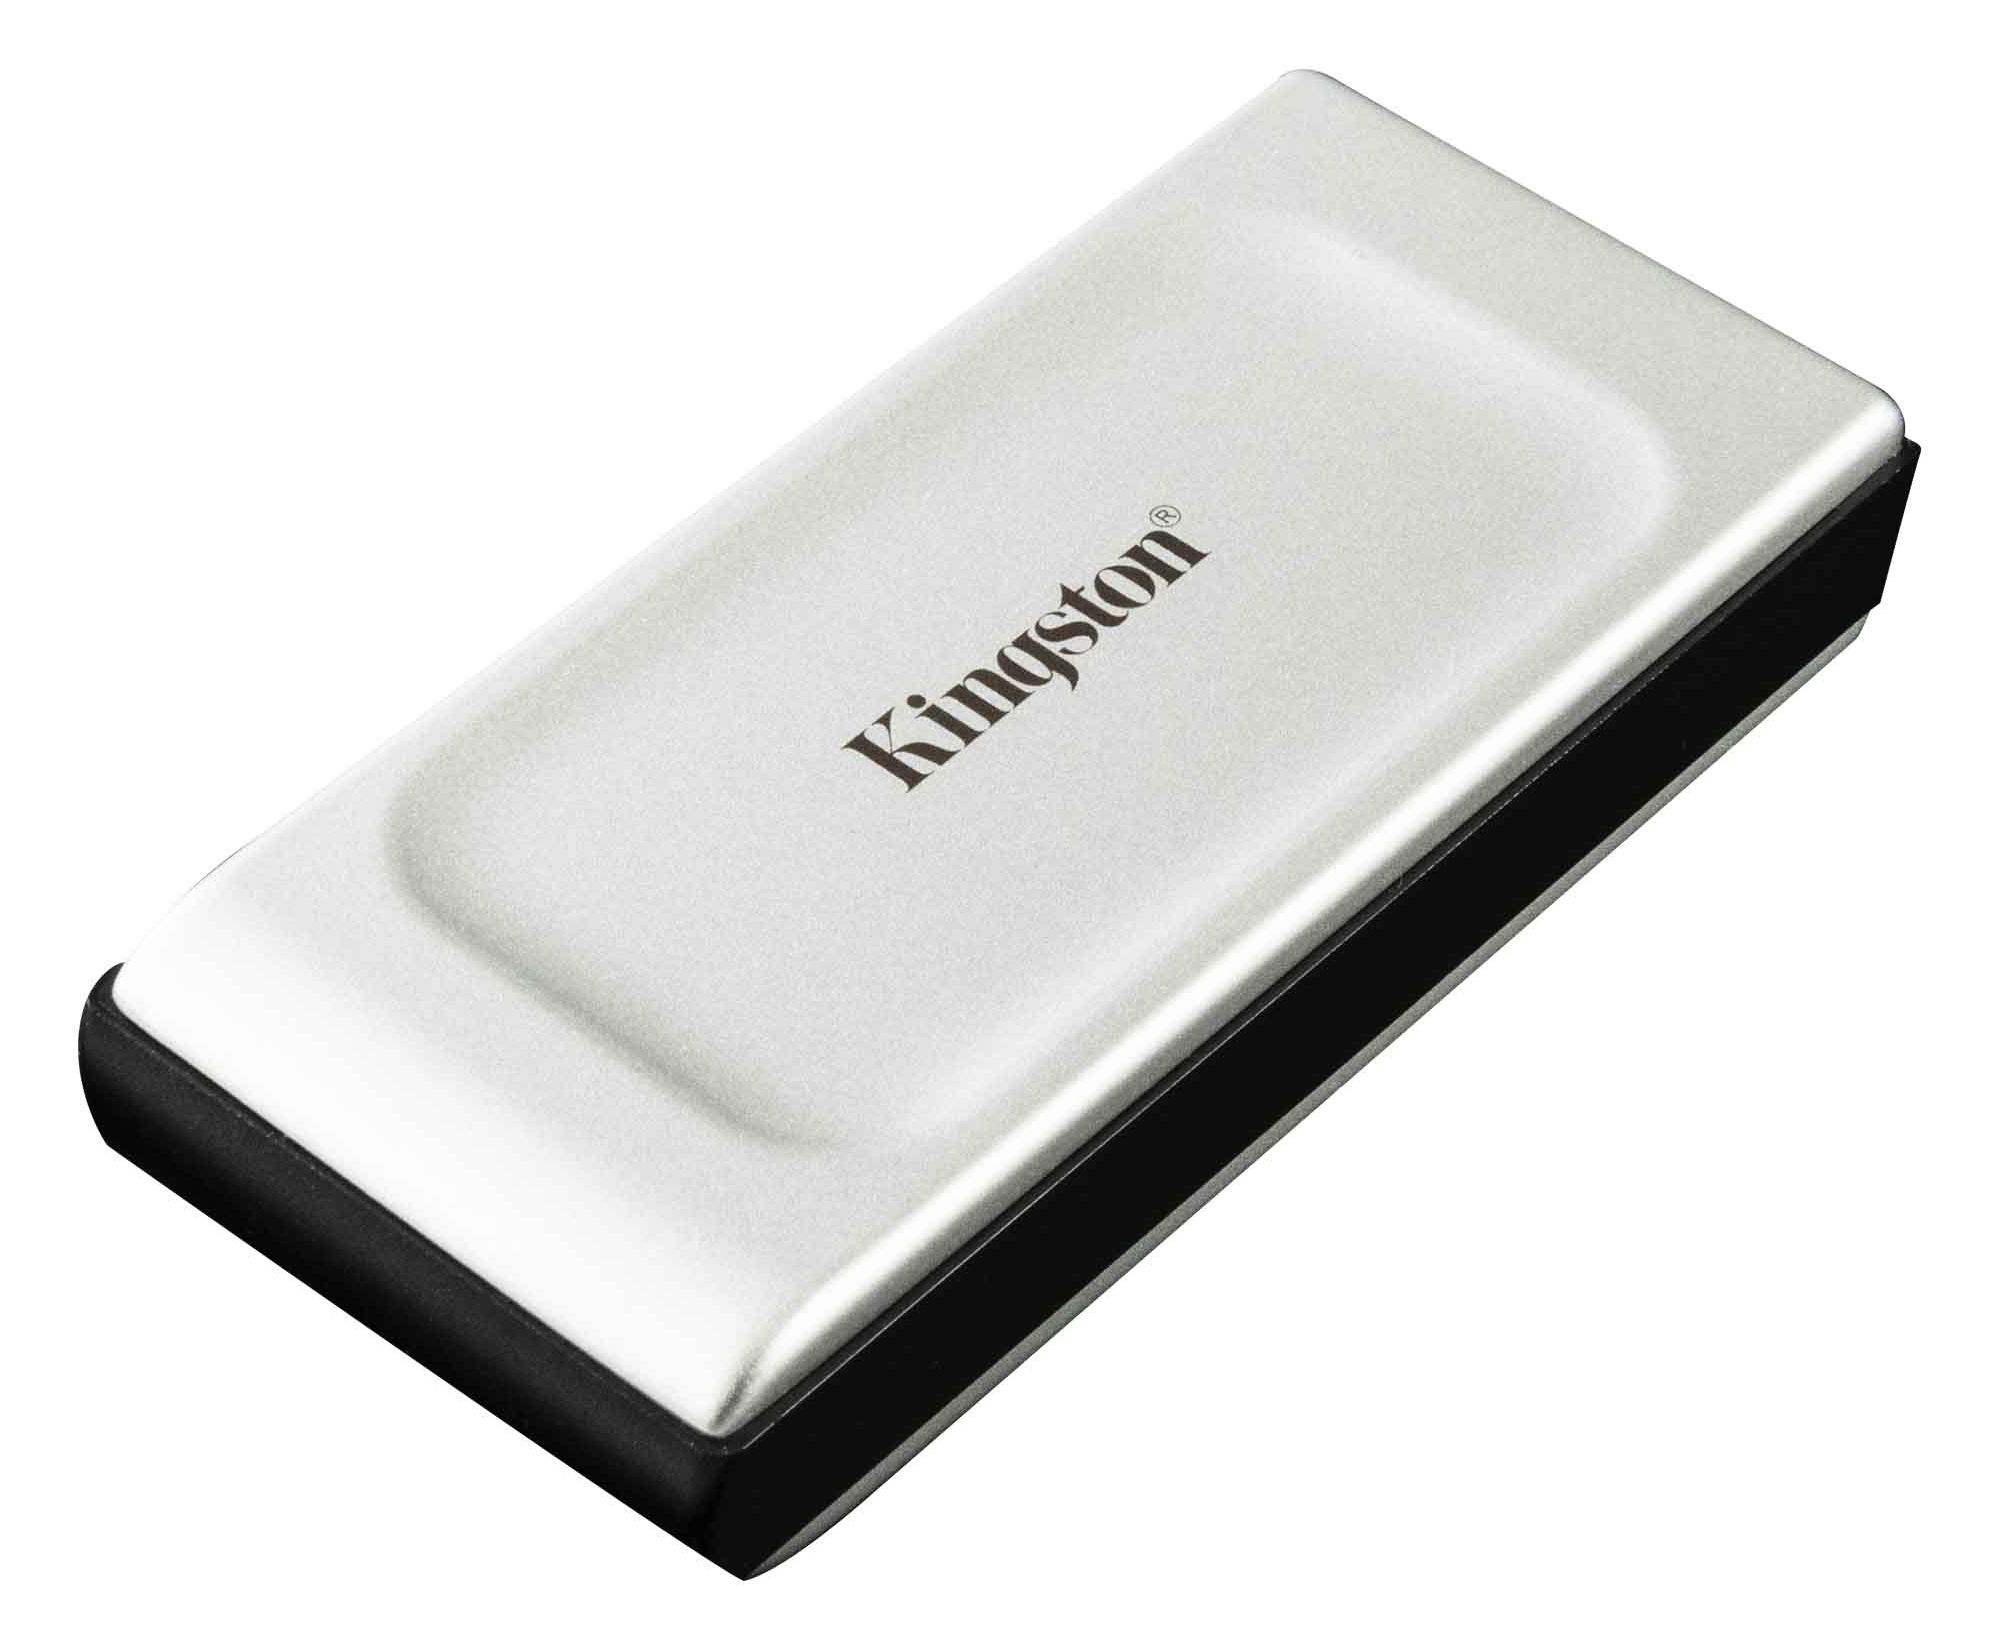 Daily News | Online News Kingston XS200 USB SSD - Most portable high-capacity drive